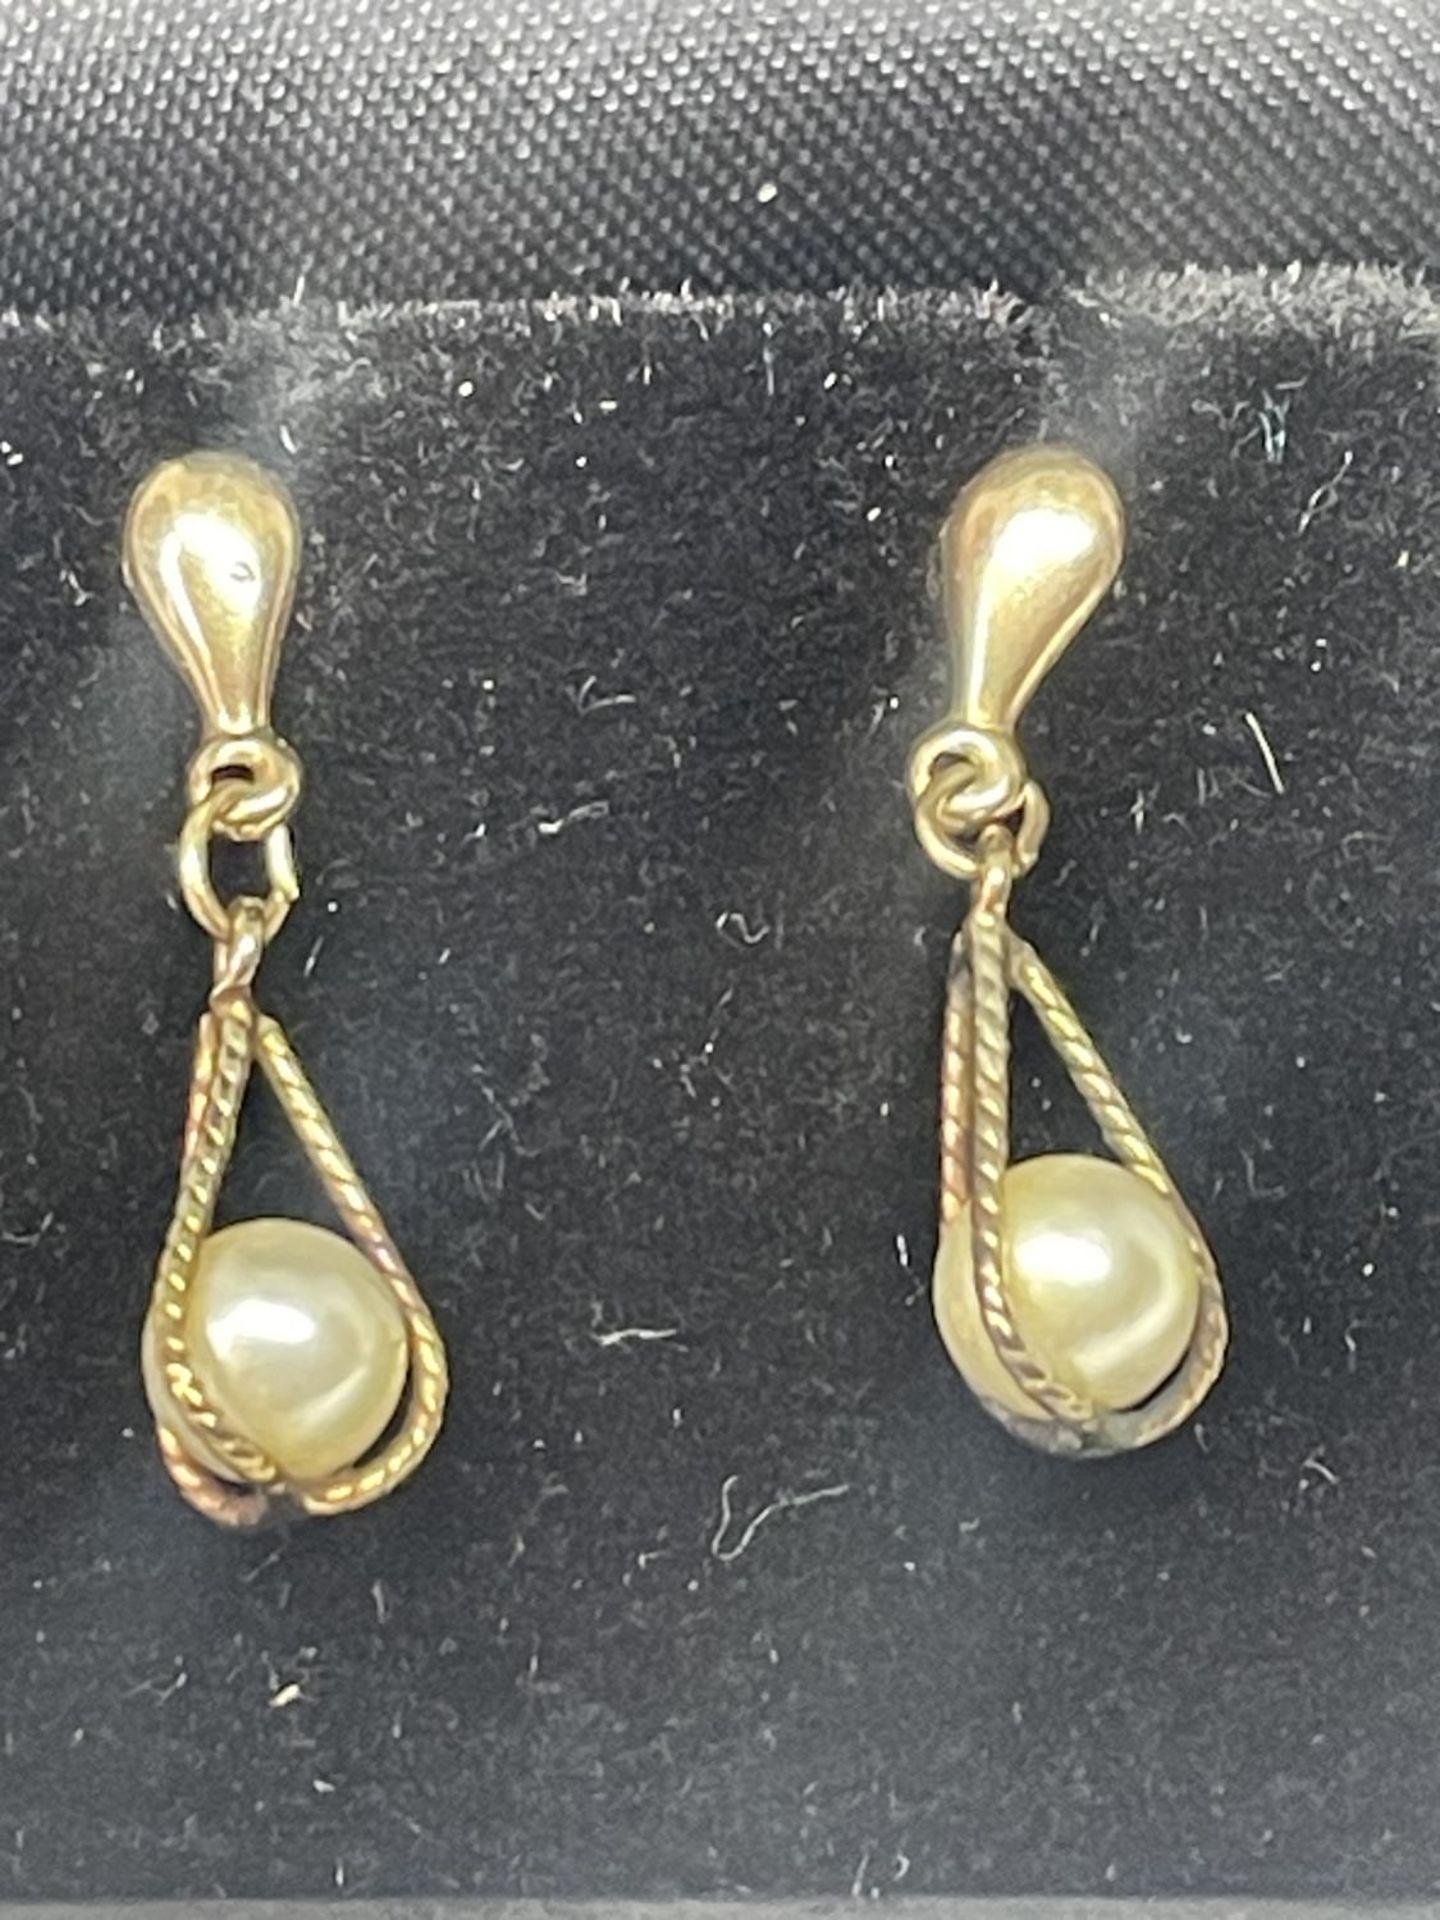 A PAIR OF 9 CARAT GOLD AND PEARL EARRINGS IN A PRESENTATION BOX - Bild 2 aus 3